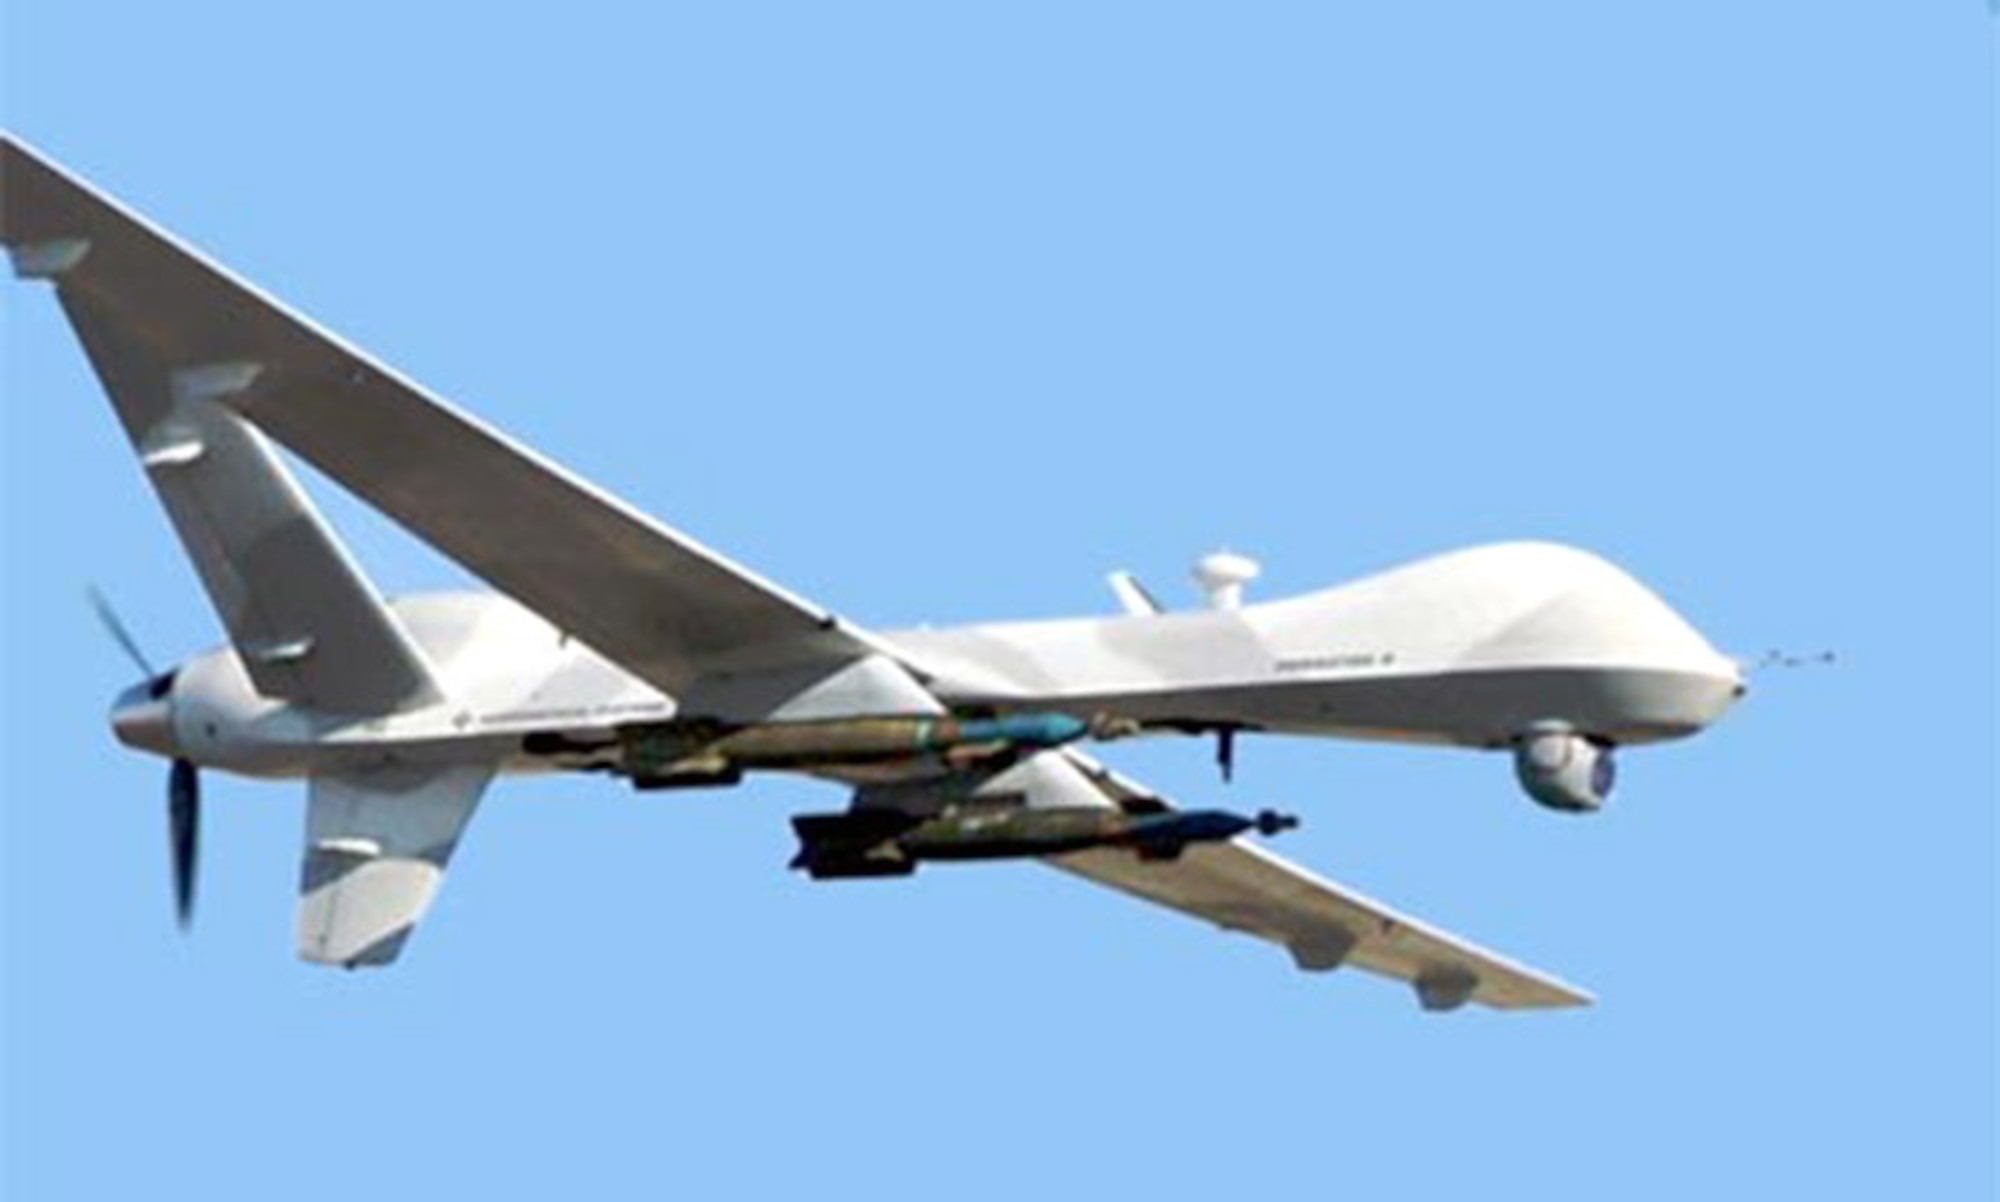 The "Reaper" has been chosen as the name for the MQ-9 unmanned aerial vehicle. (Courtesy photo)

